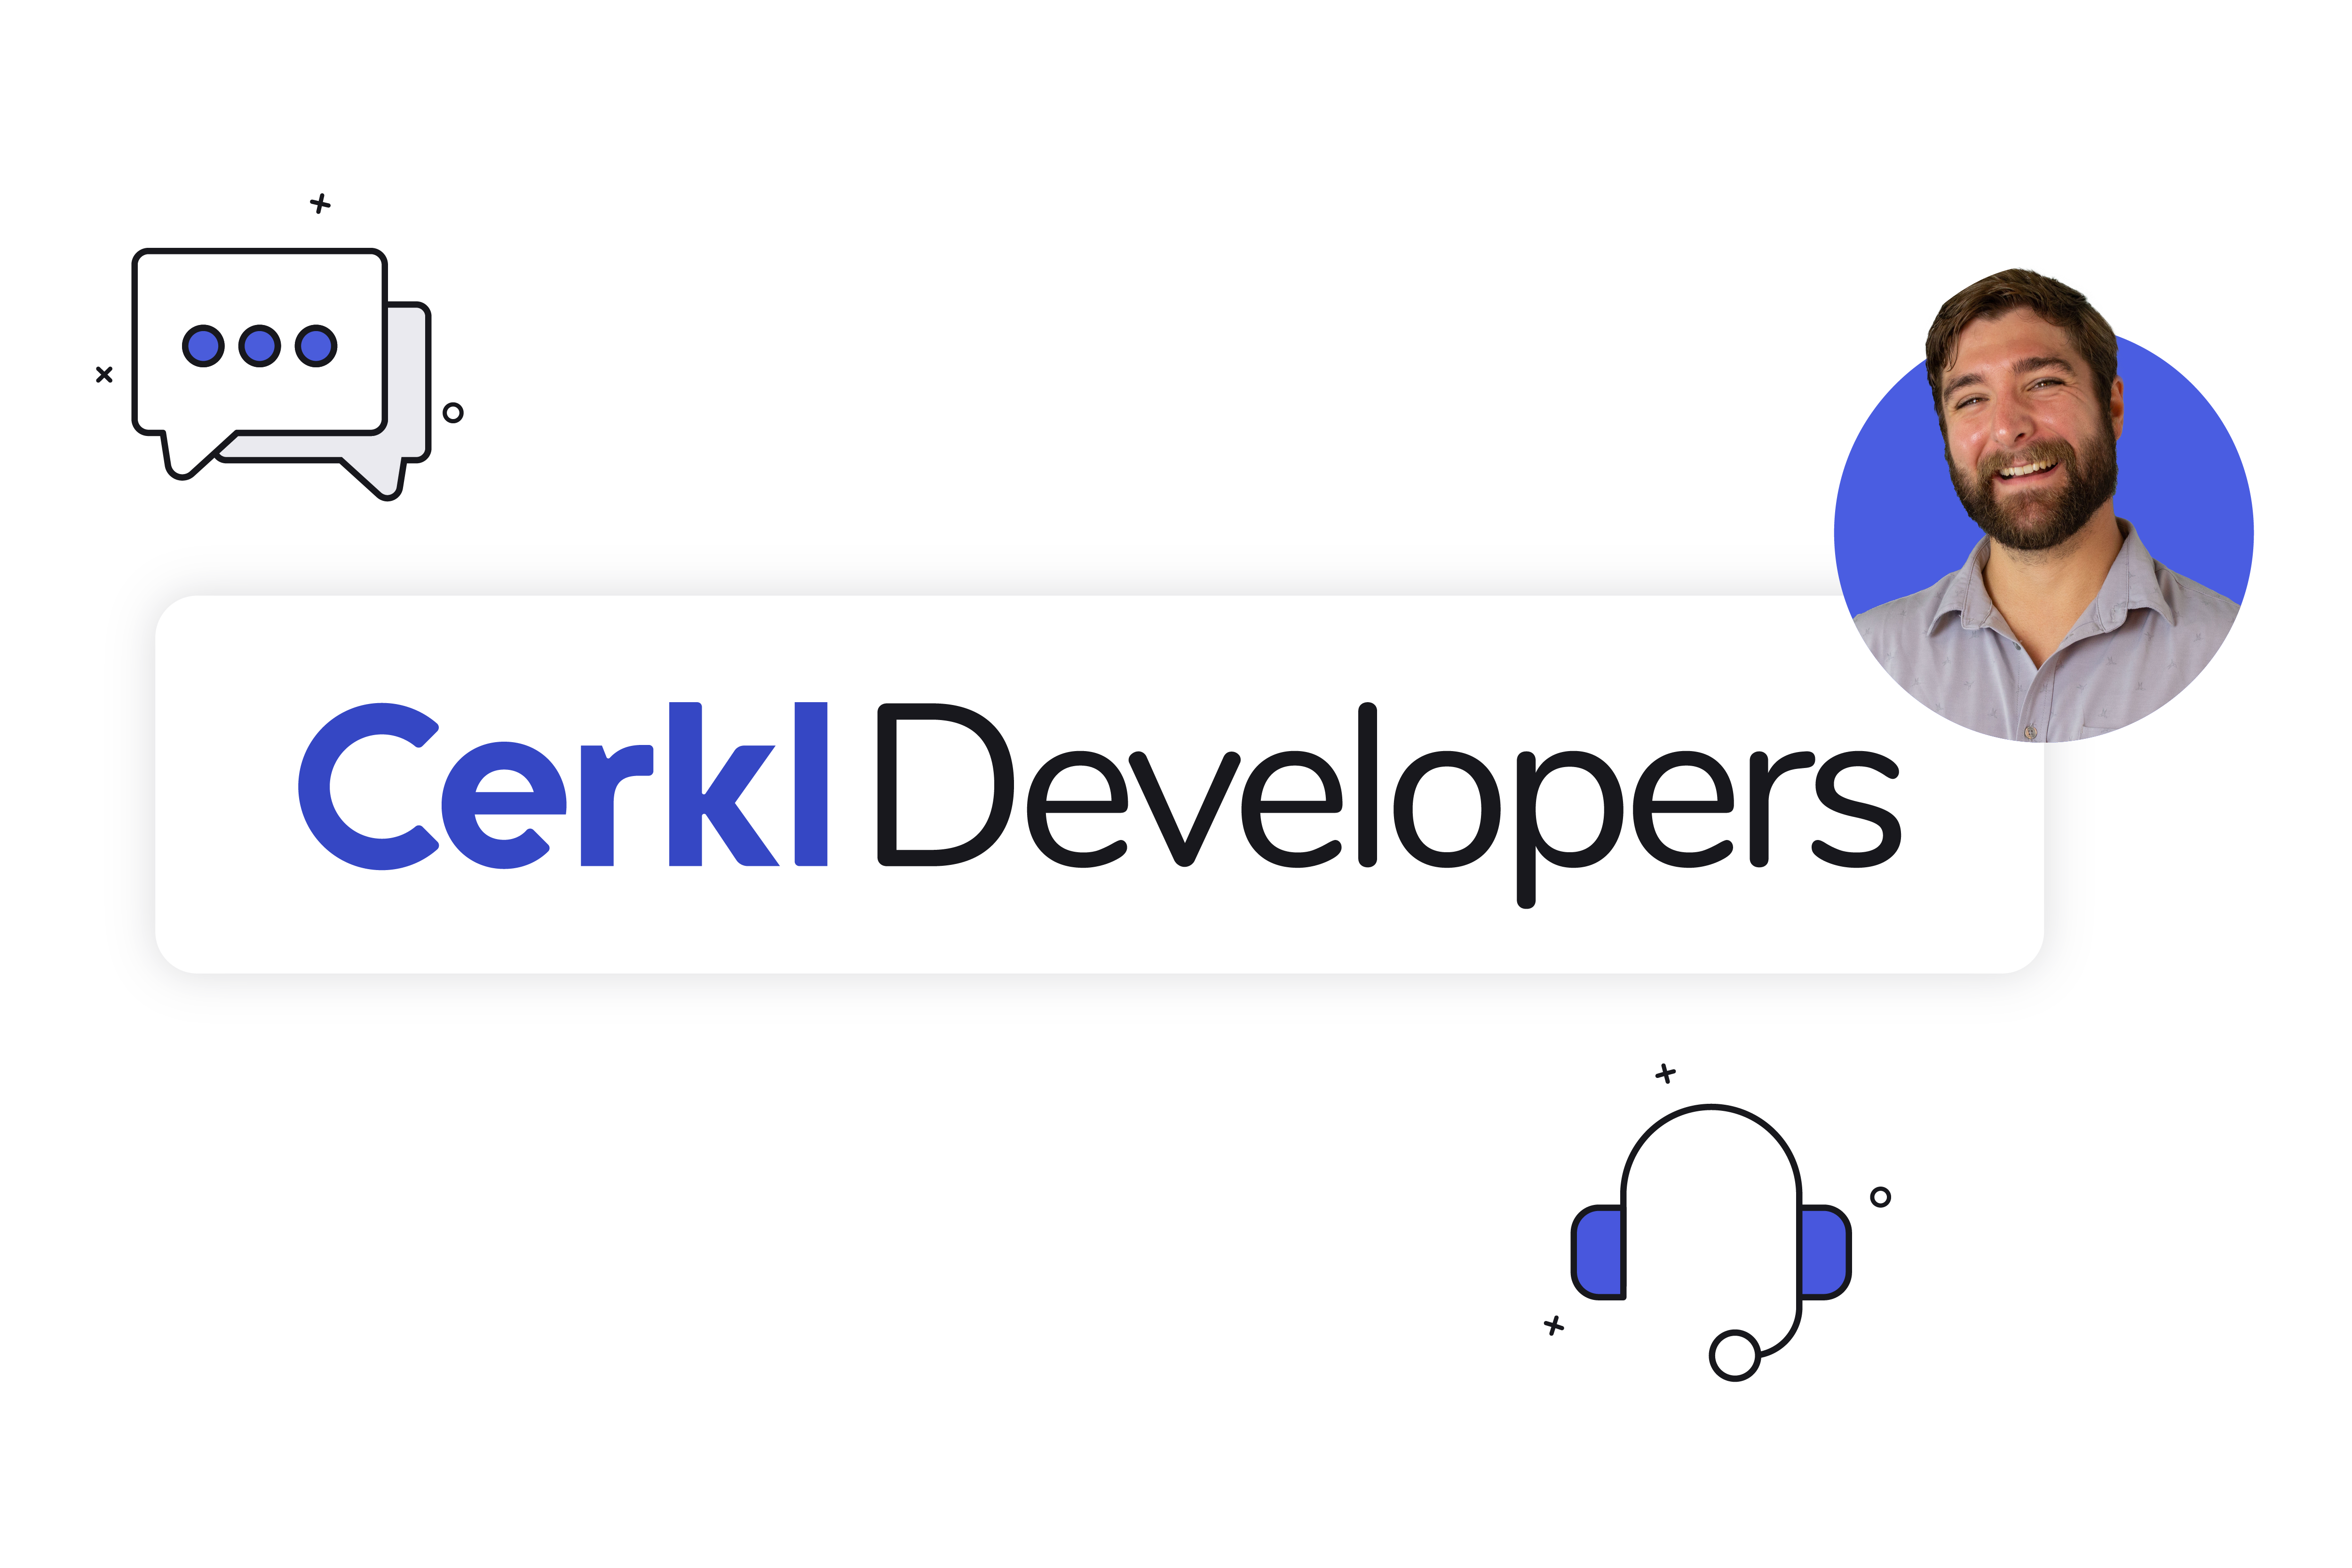 Cerkl Developers site is highlighted with smiling Cerkl employee